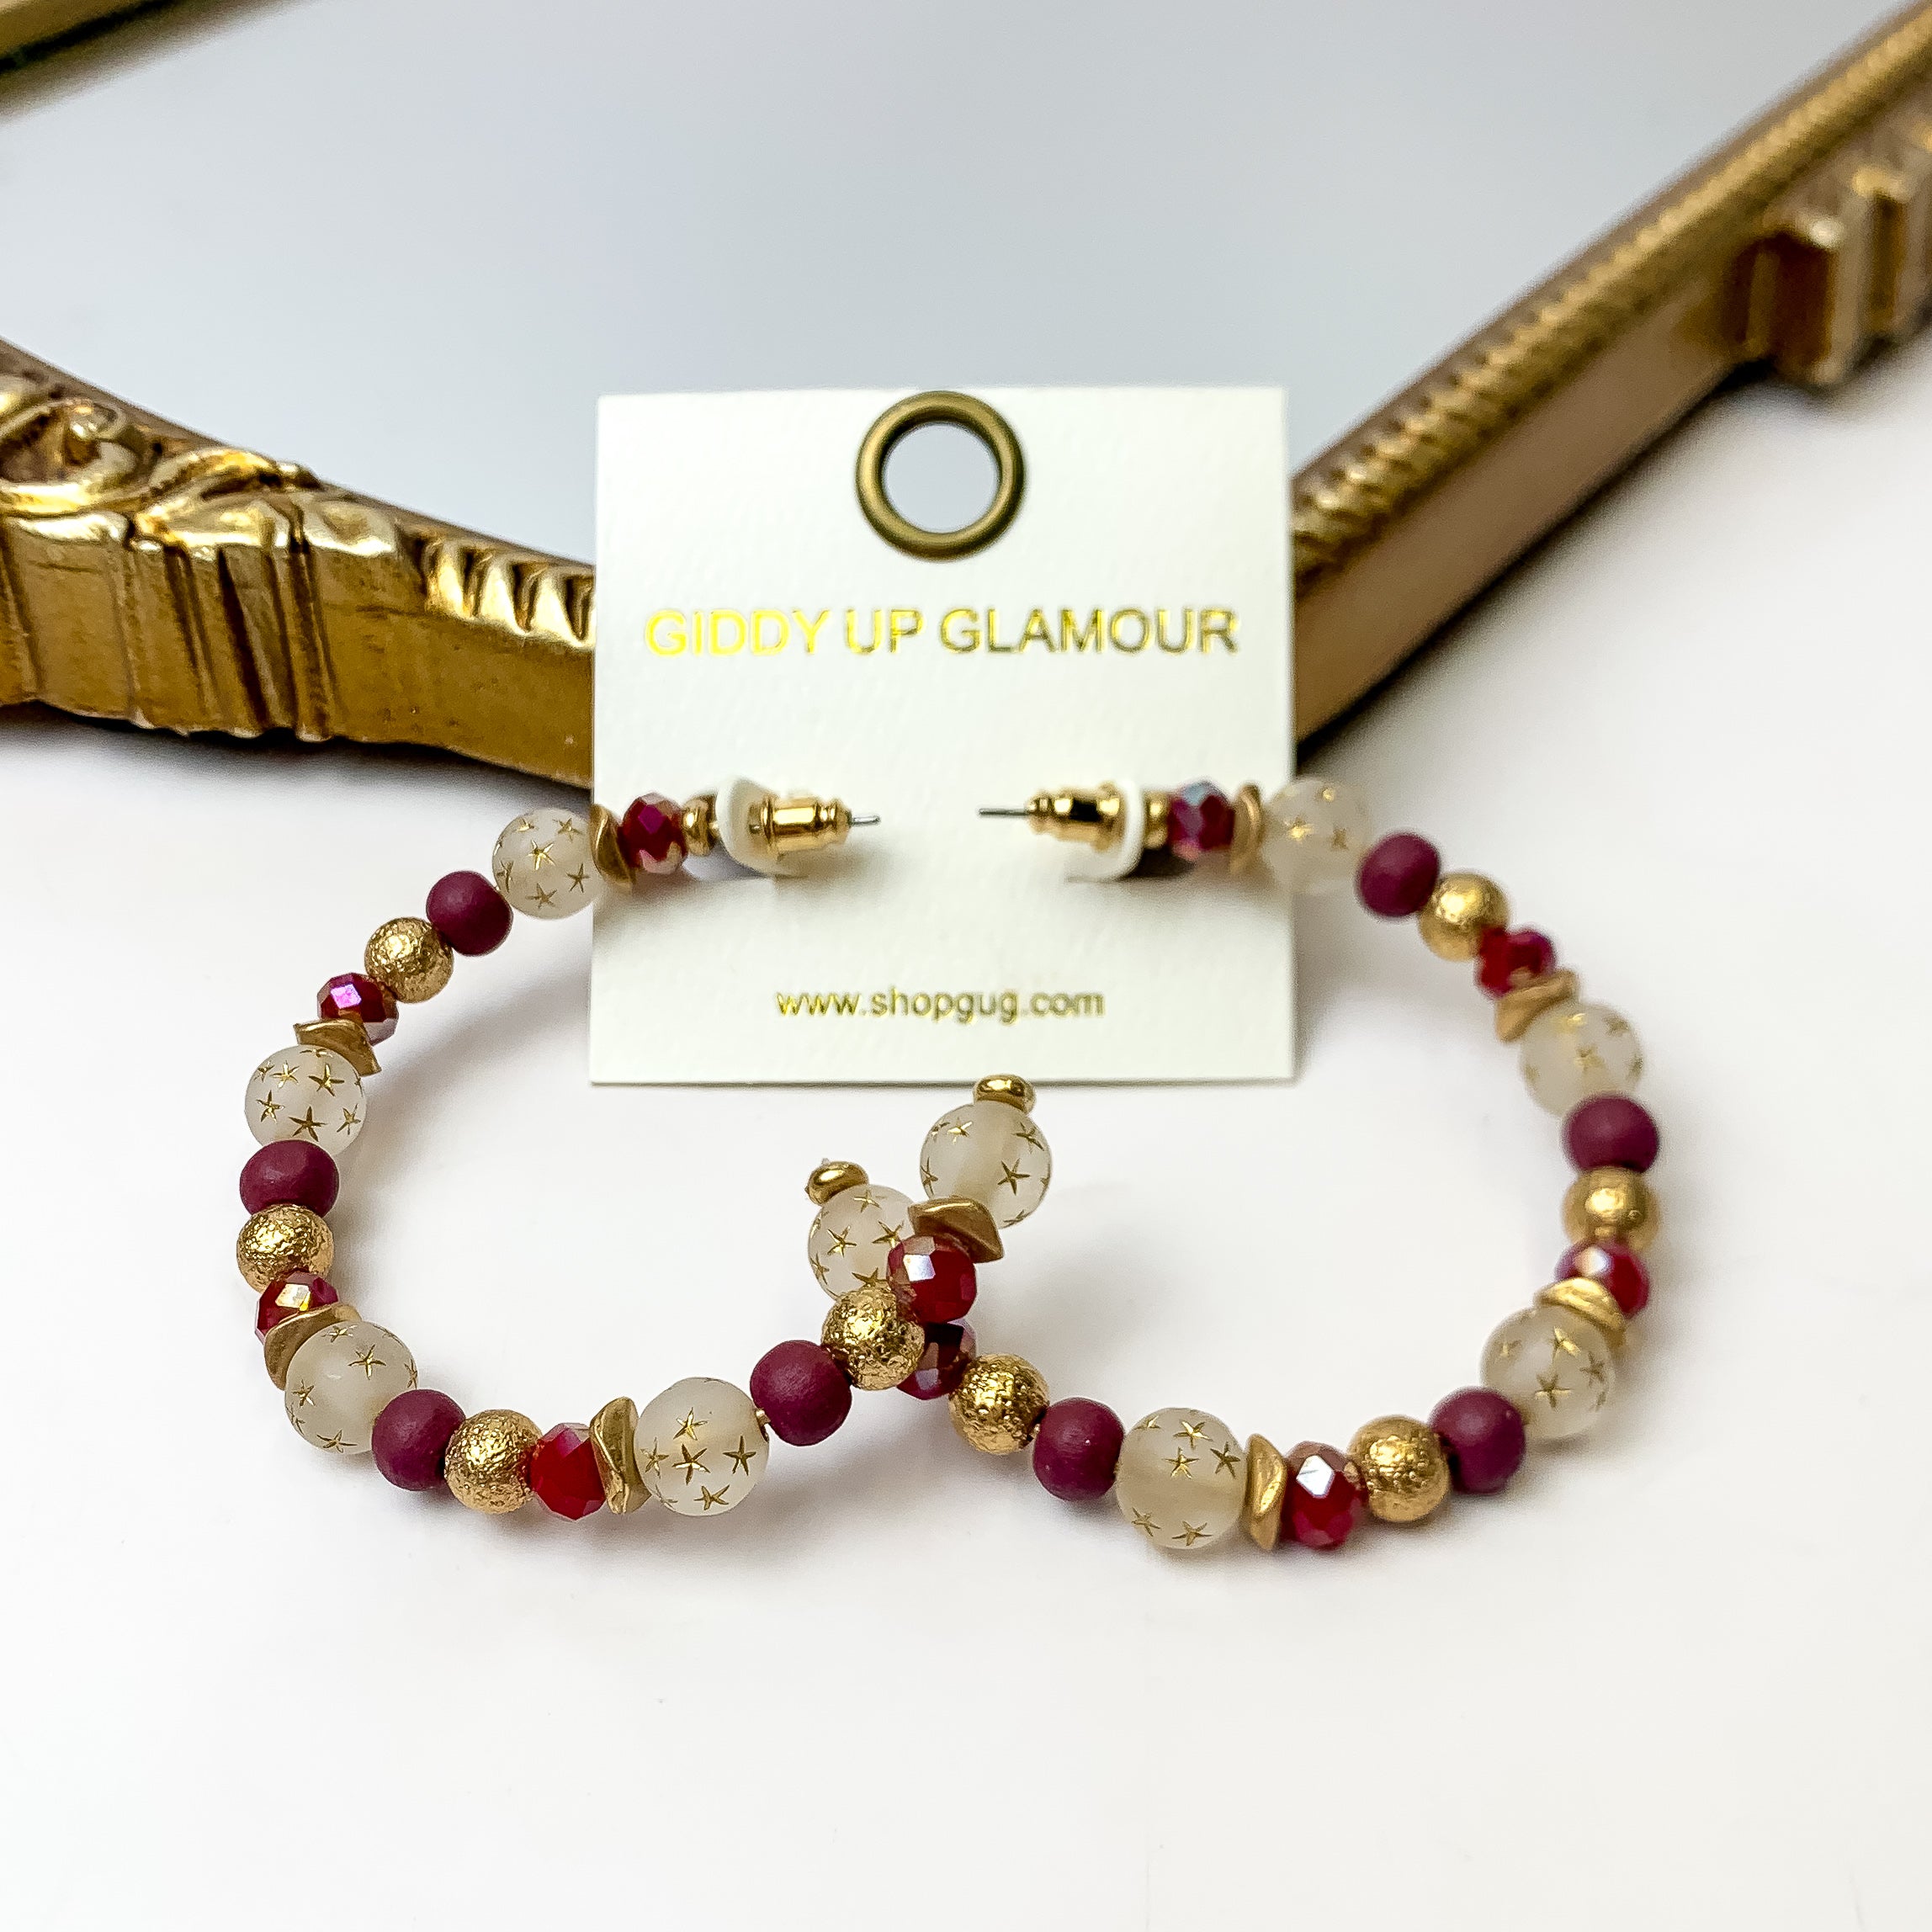 A pair of maroon and gold hoop earrings featuring gold stars on an ivory earring card. These earrings are pictured with a white background and gold mirror.